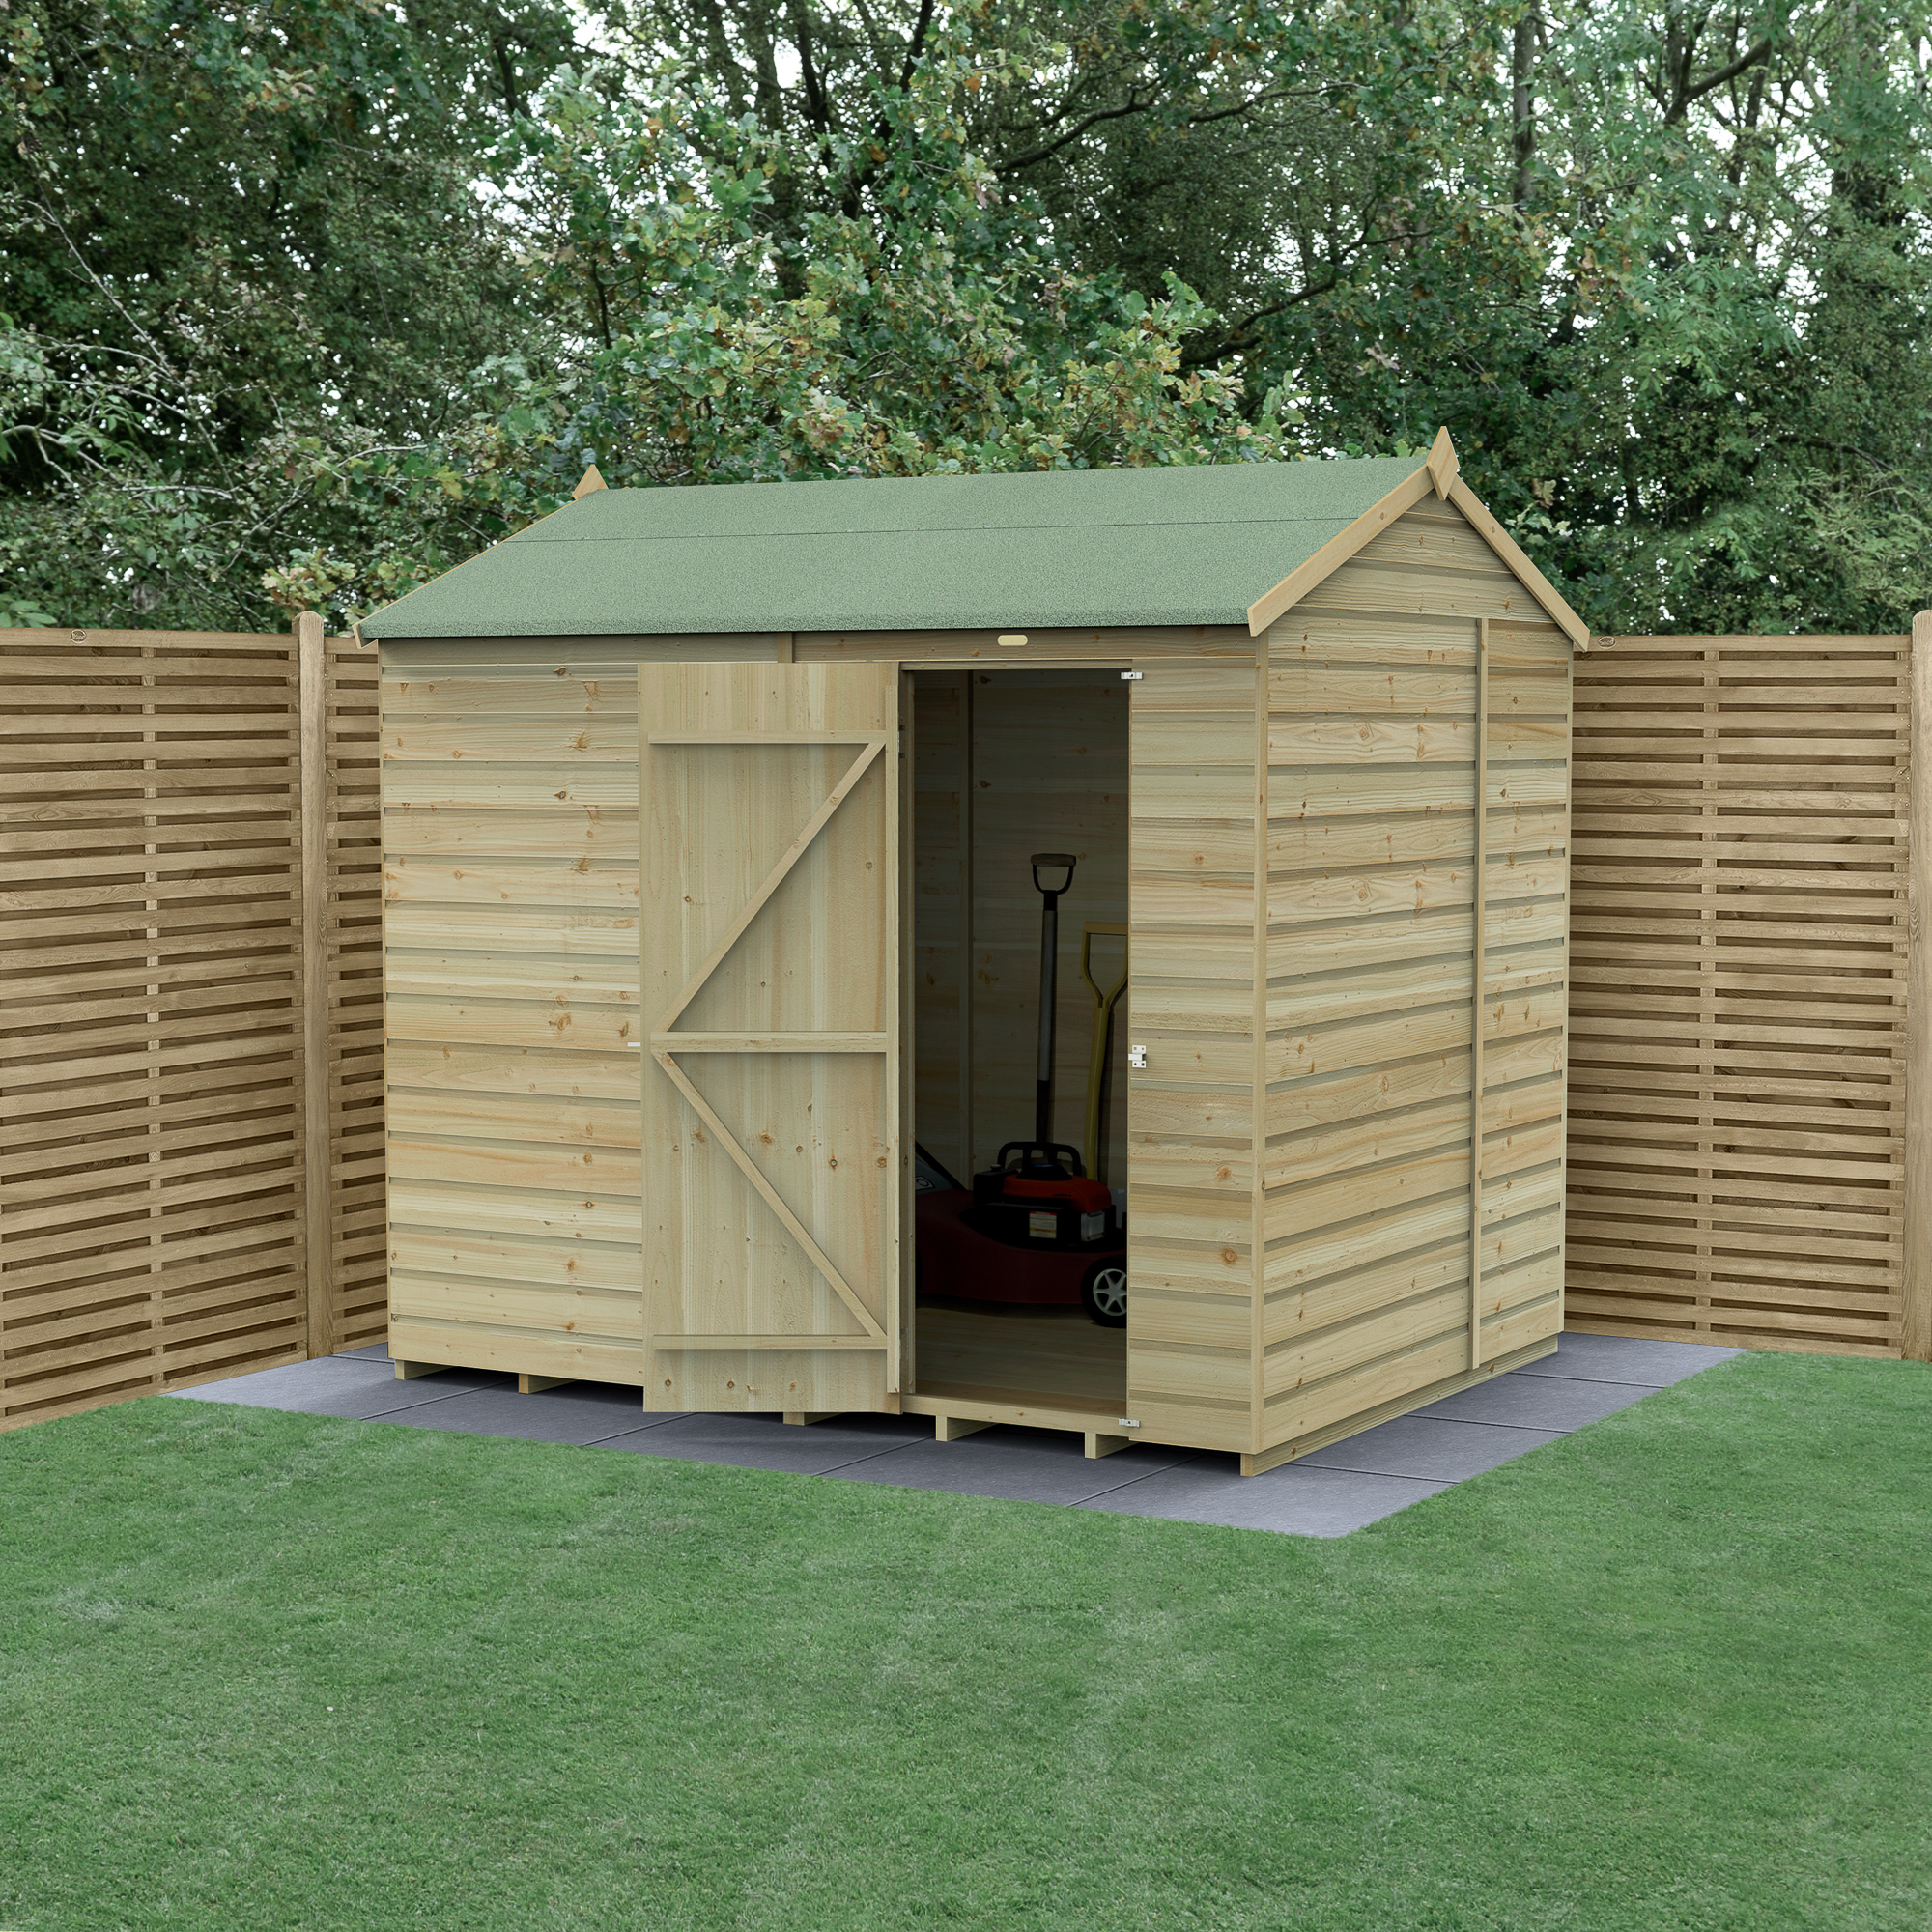 Forest Garden Beckwood 8 x 6ft Reverse Apex Shiplap Pressure Treated Windowless Shed with Base